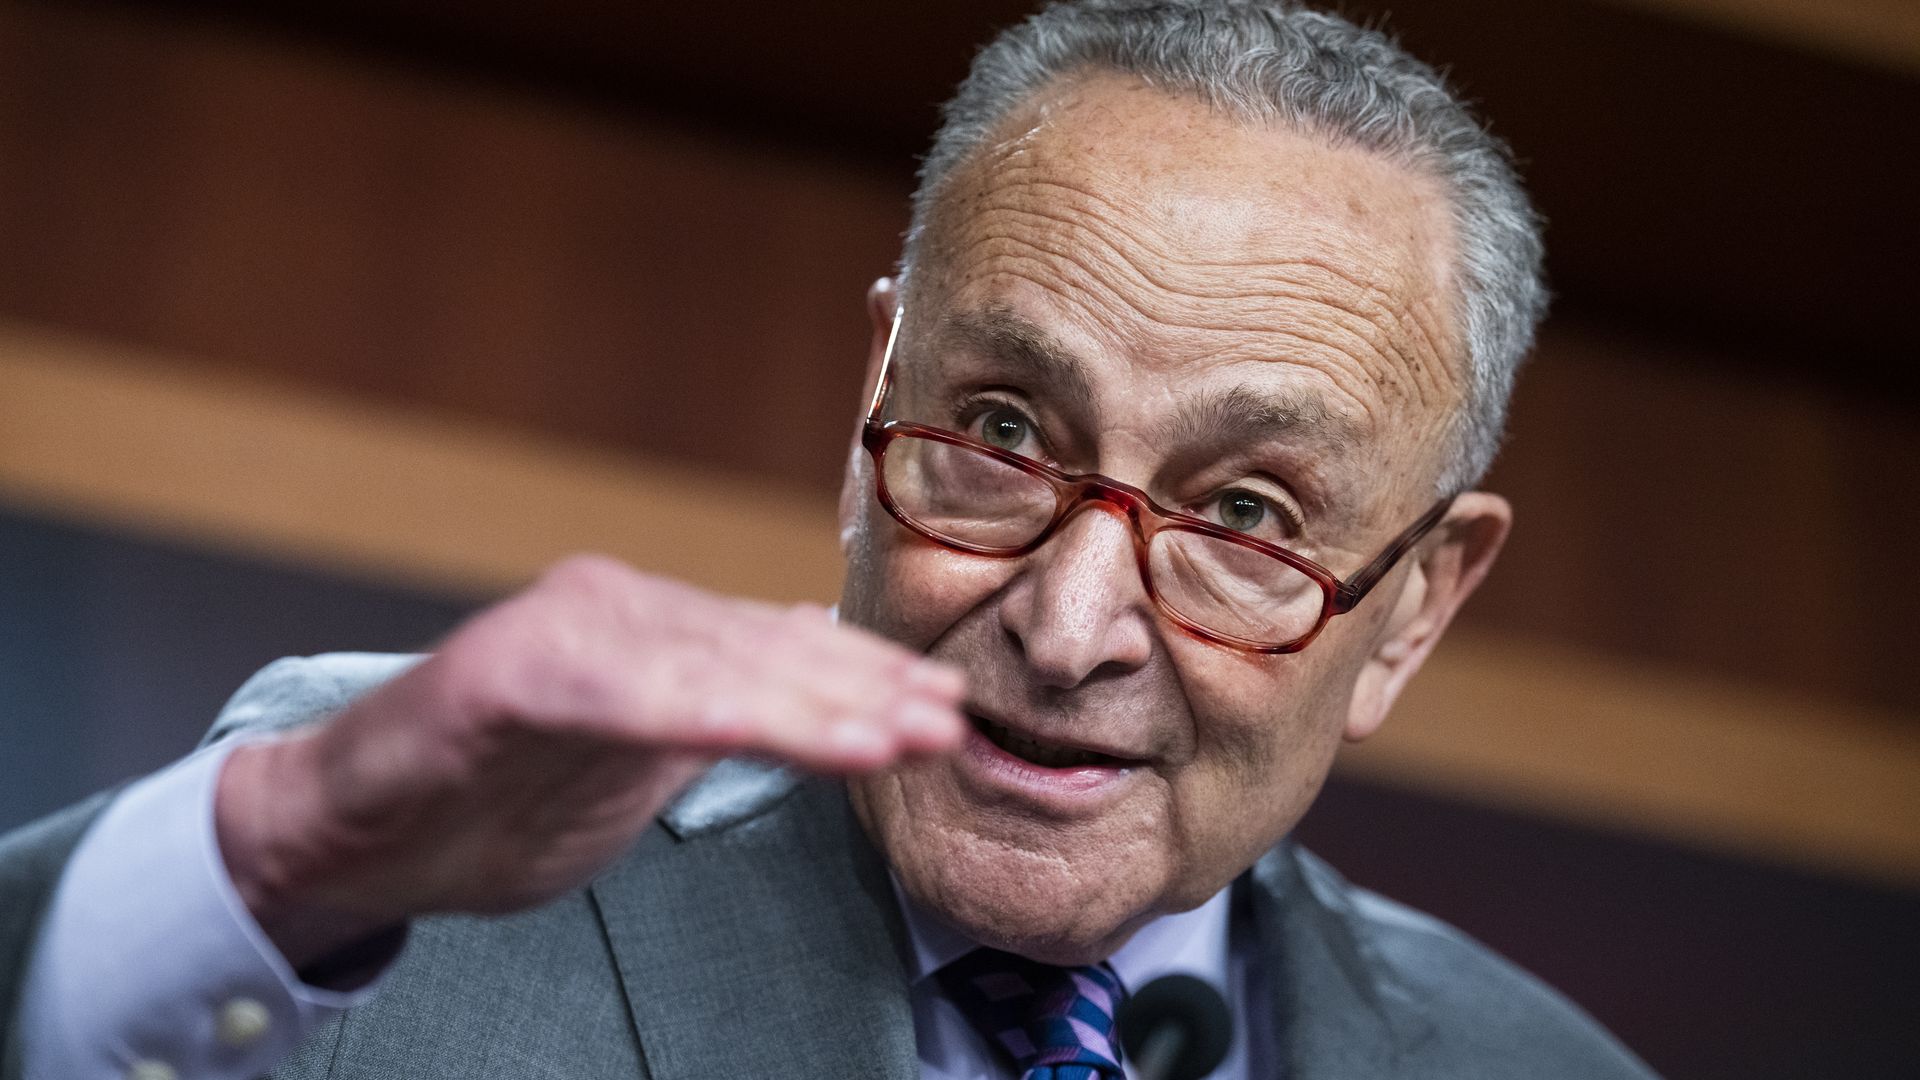 Six House staffers arrested while protesting in Chuck Schumer's office